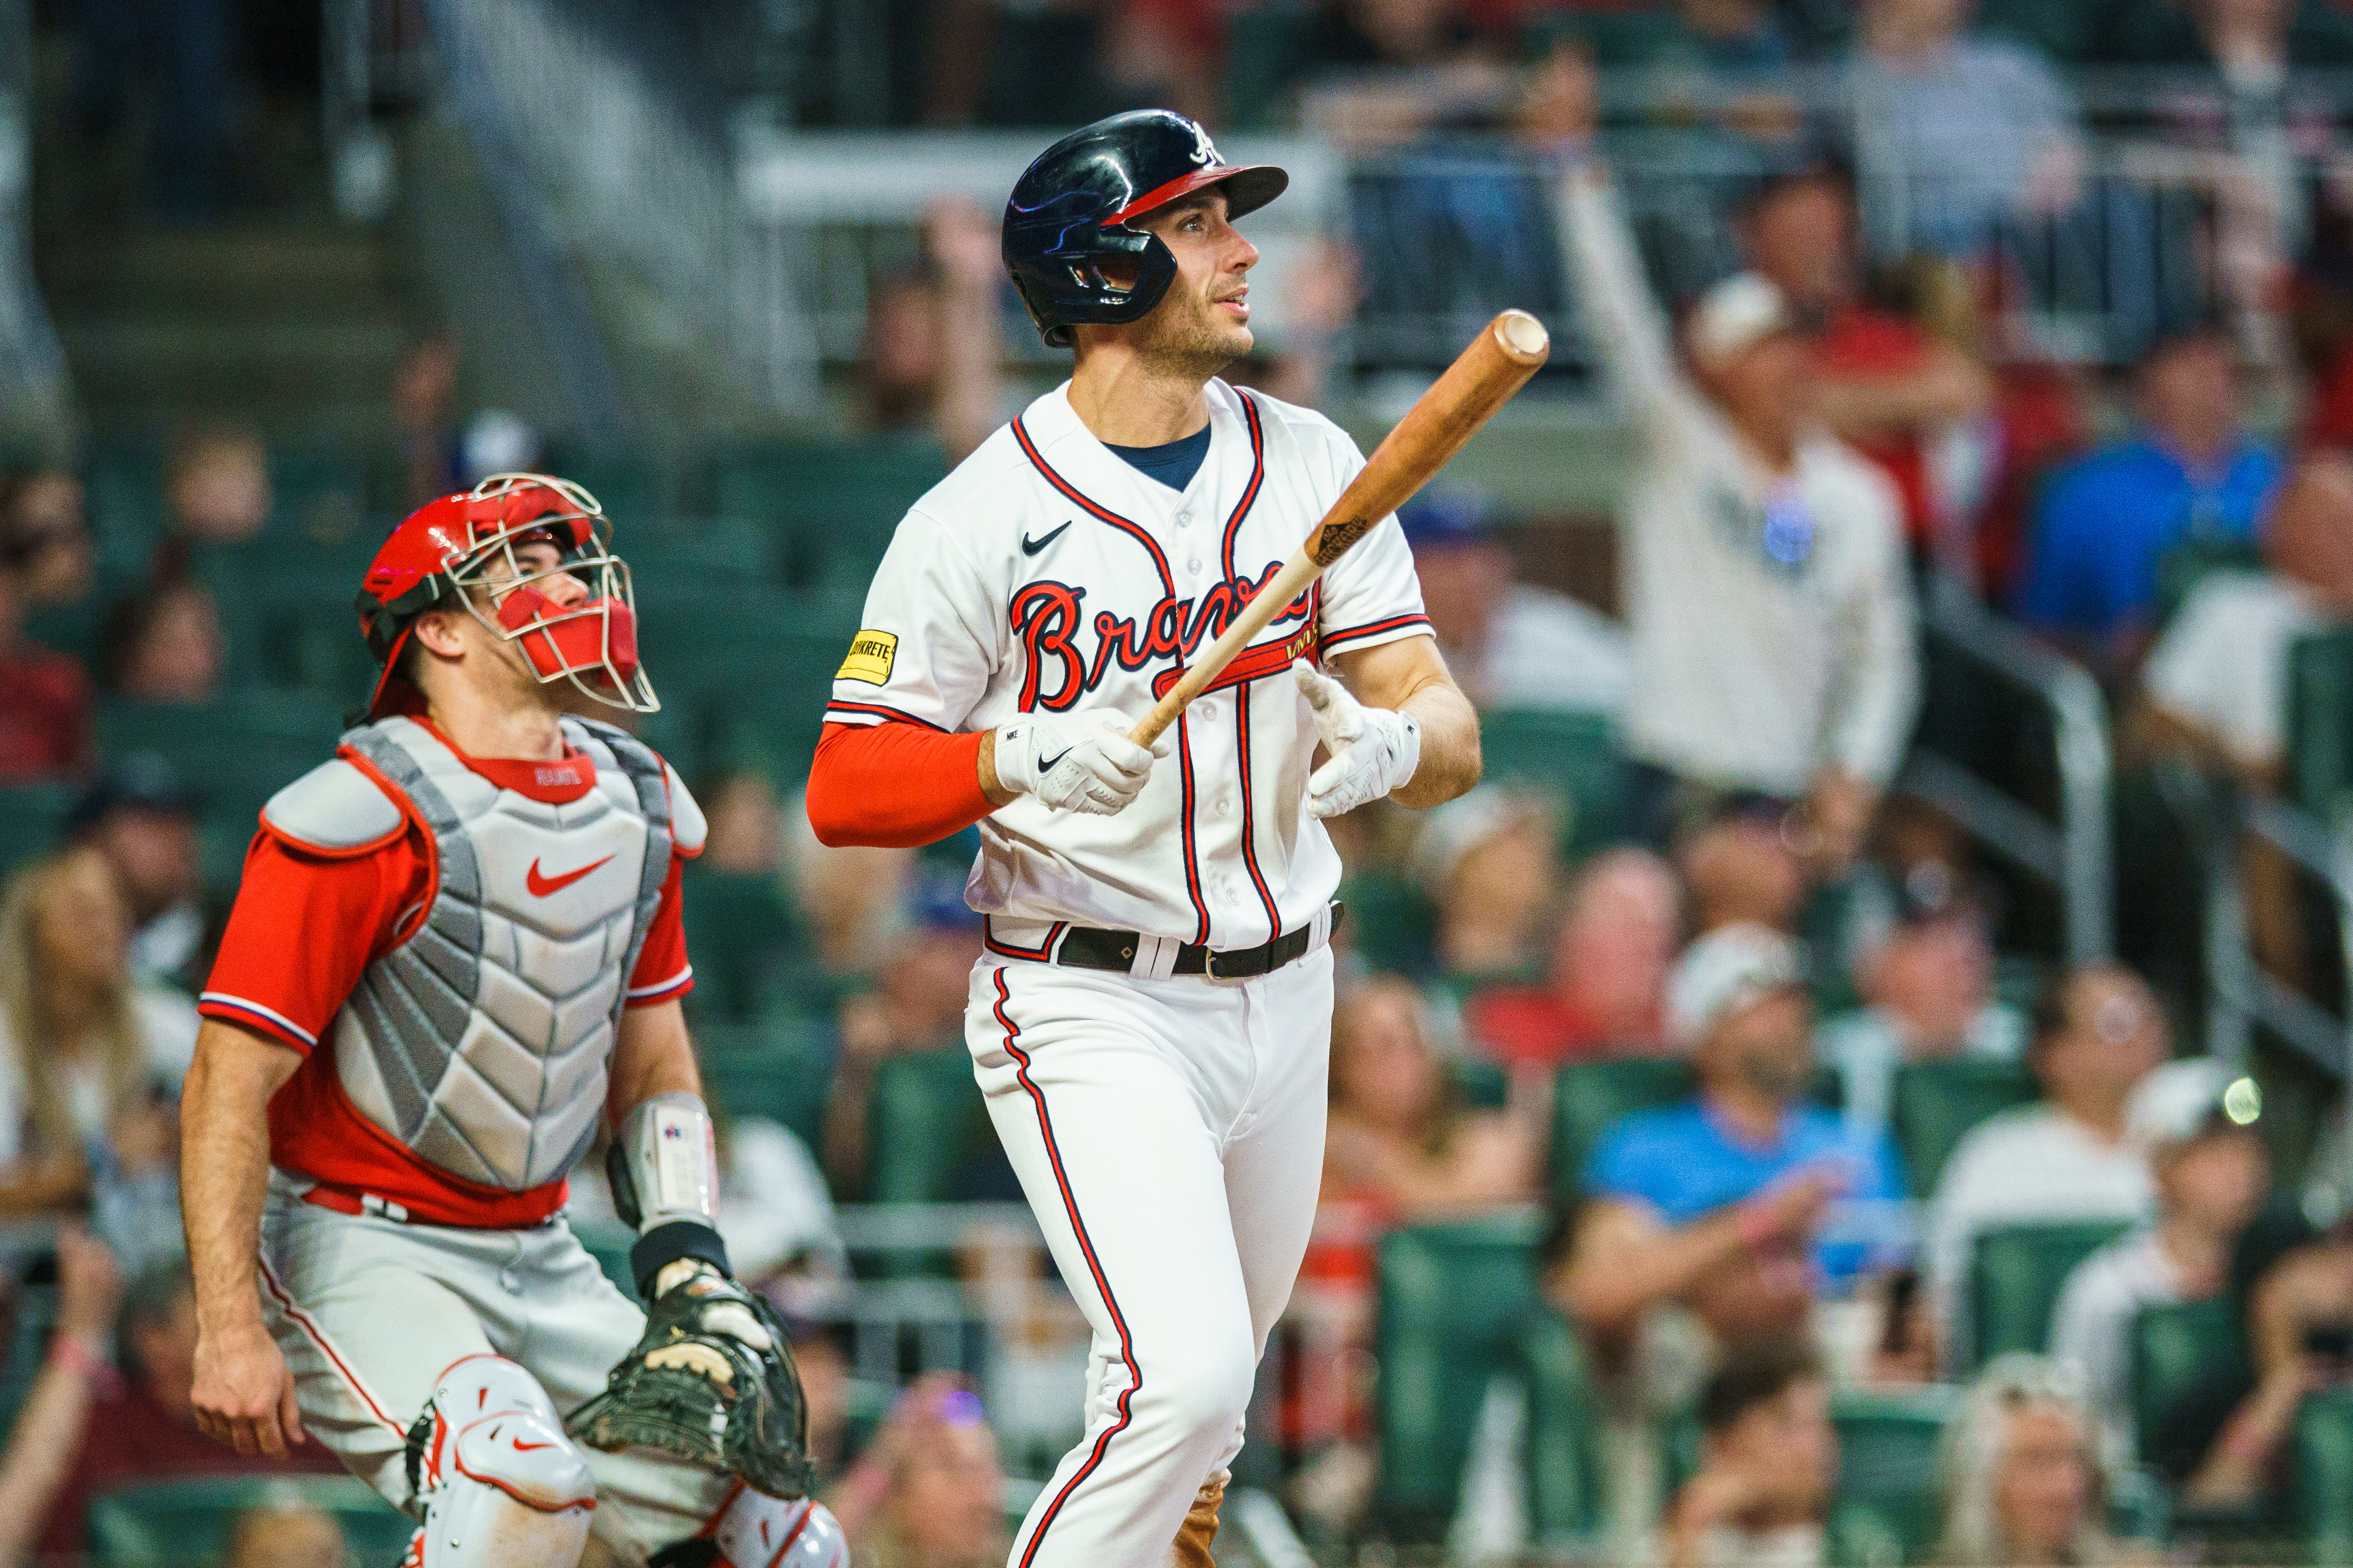 Matt Olson of the Atlanta Braves hits a home run during the fifth inning during the game against the Philadelphia Phillies at Truist Park on May 28, 2023 in Atlanta, Georgia.